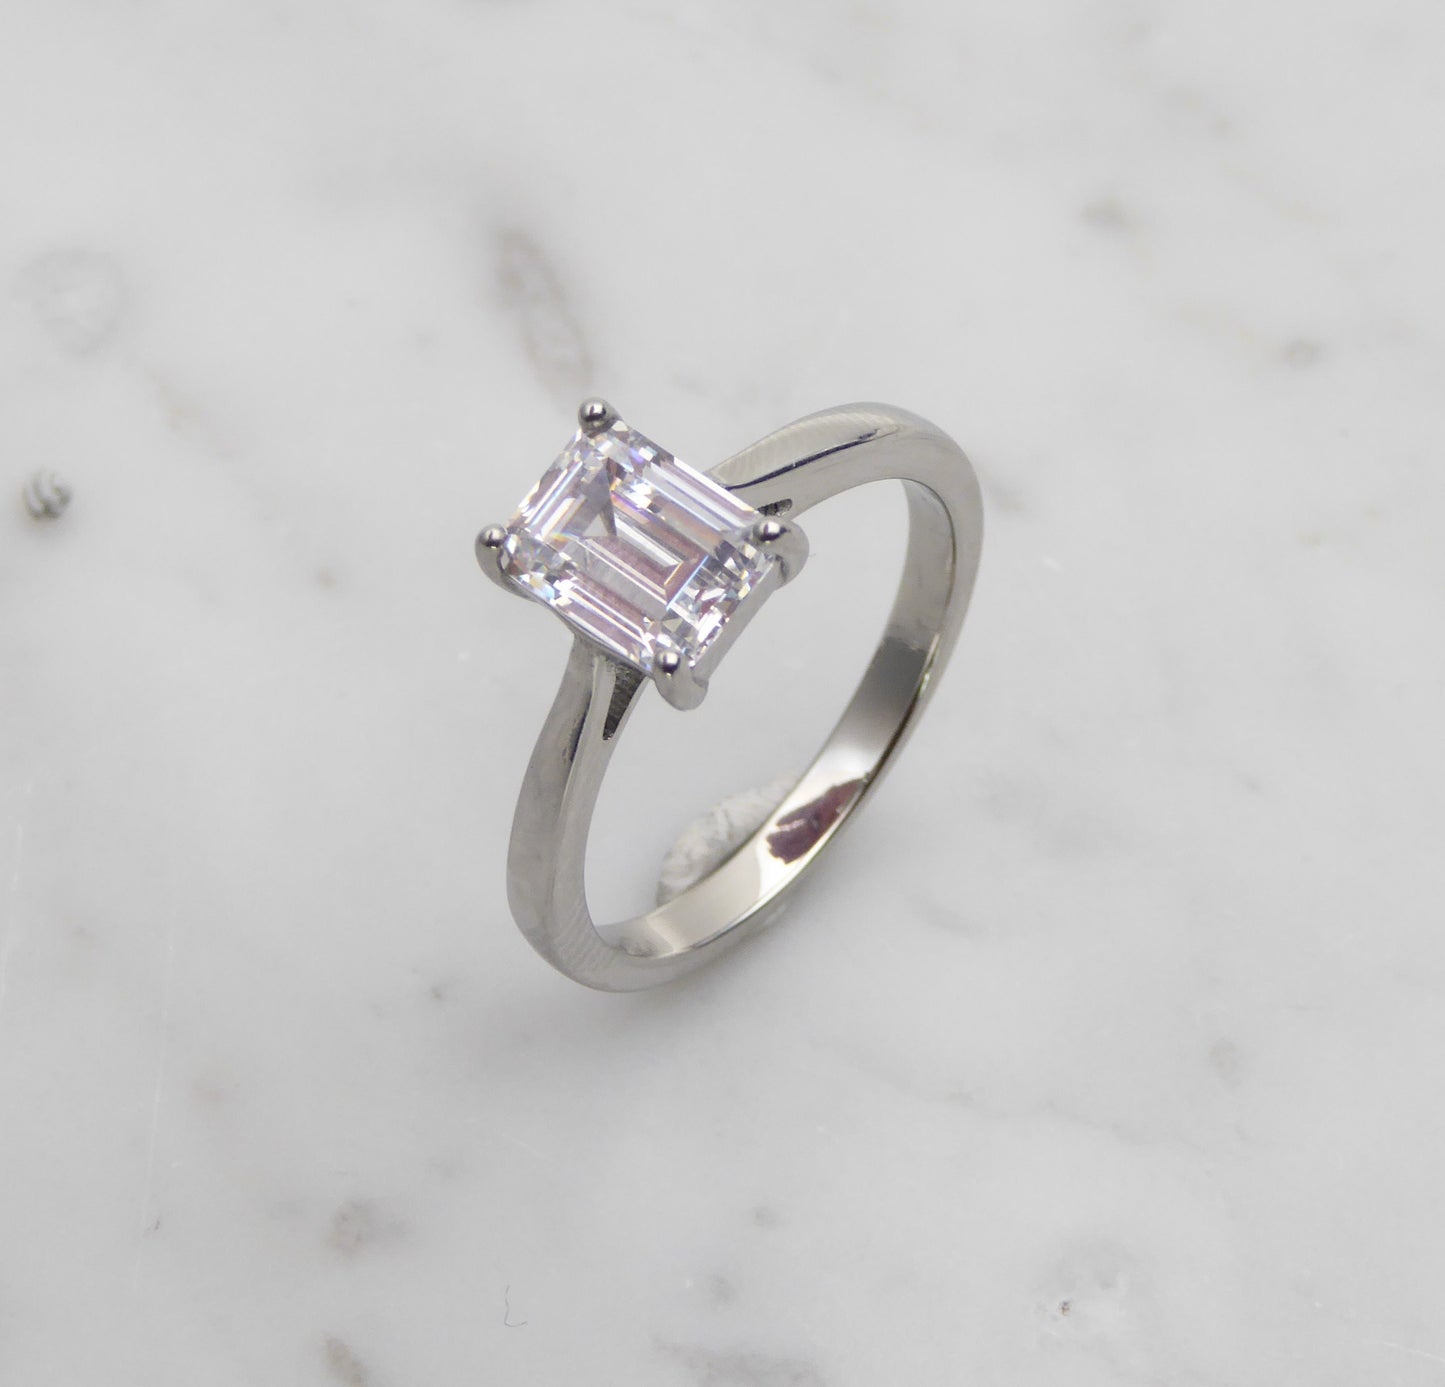 2ct Emerald Cut Solitaire cathedral ring in Titanium or White Gold - Simulated diamond or Moissanite available